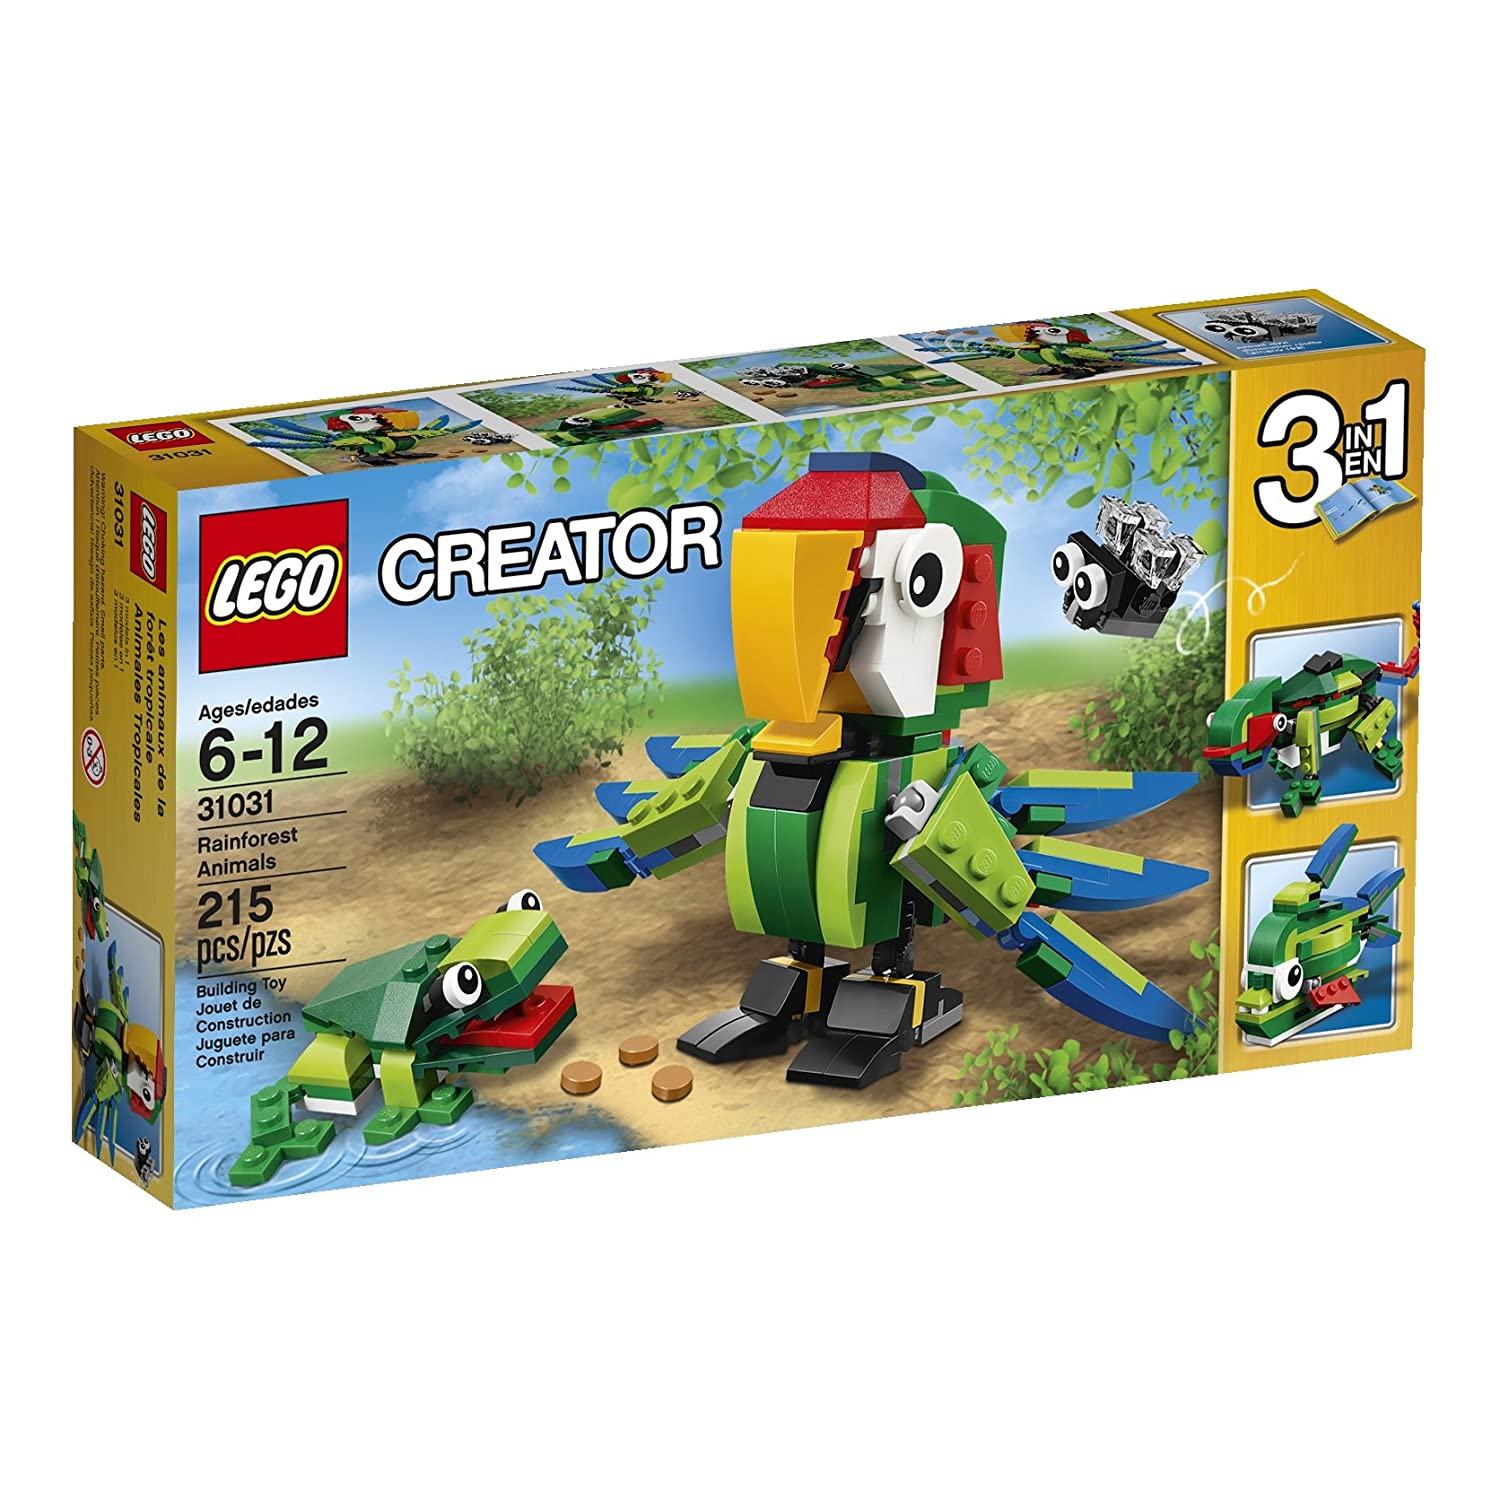 Top 9 Best LEGO Animals Sets Reviews in 2022 2